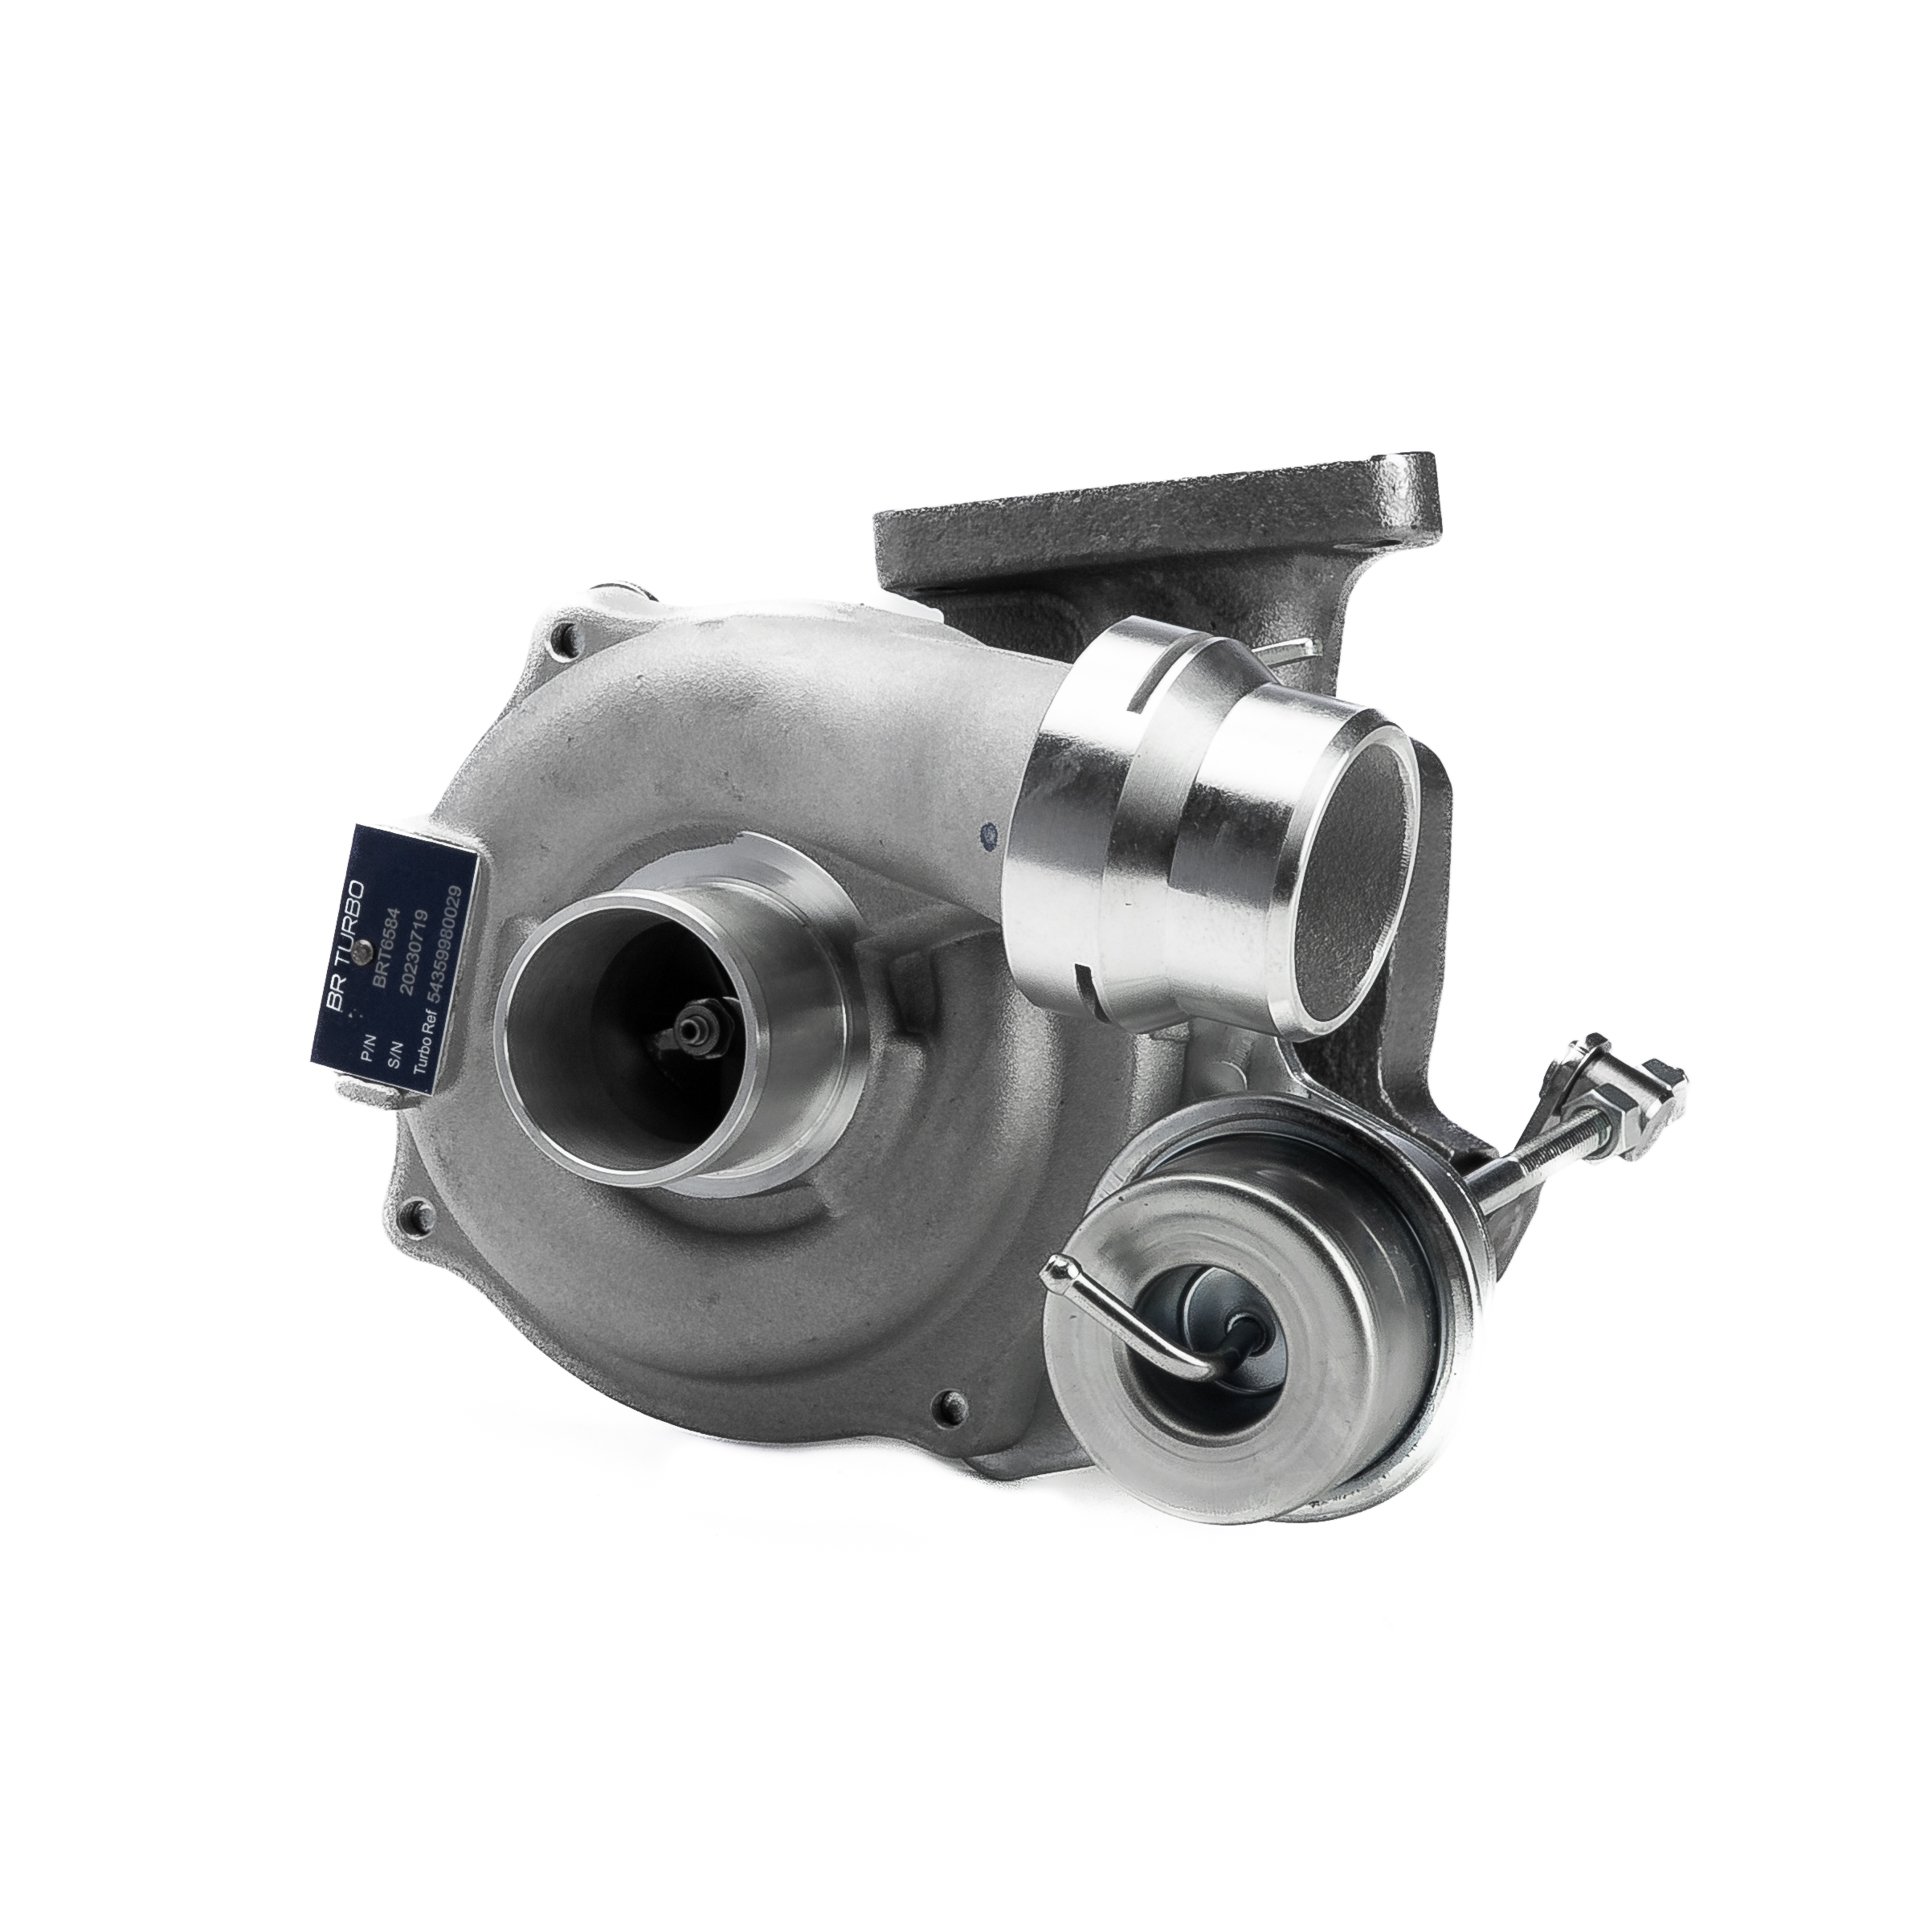 Nissan Turbocharger BR Turbo BRT6584 at a good price